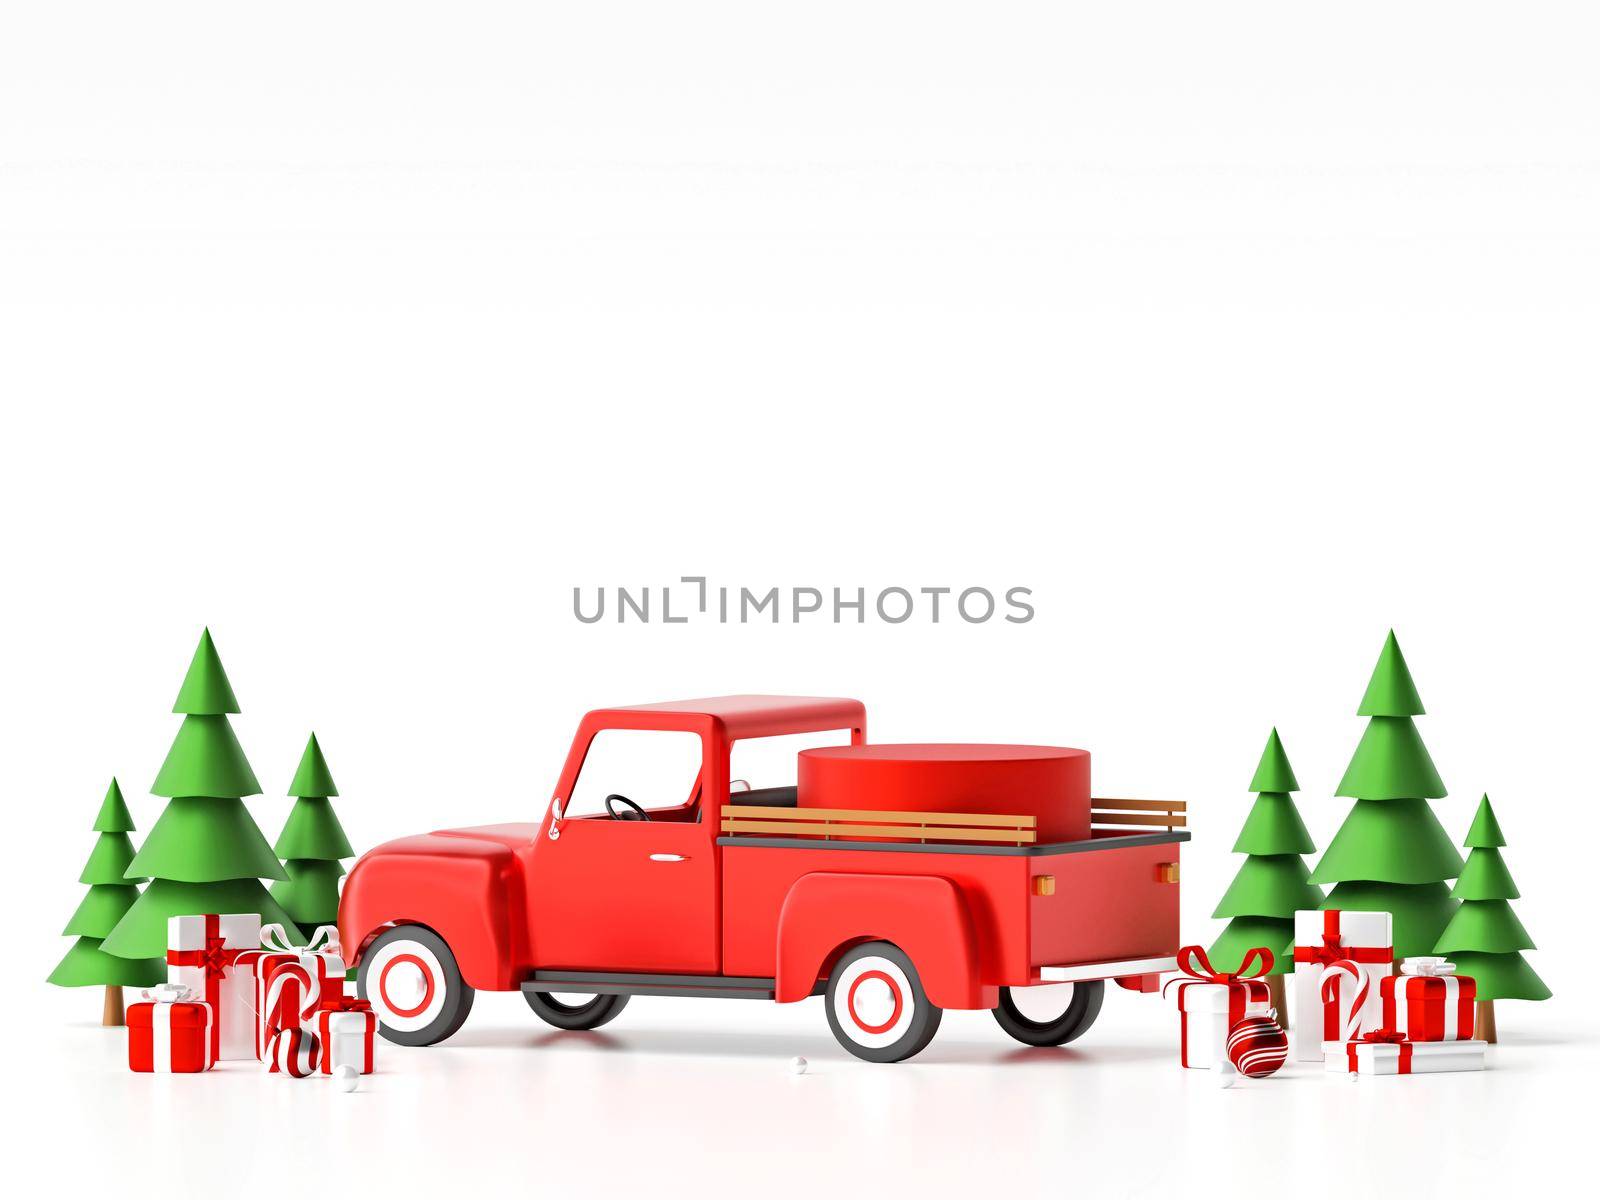 Geometric podium on Christmas car with Christmas gift for product advertisement, 3d illustration